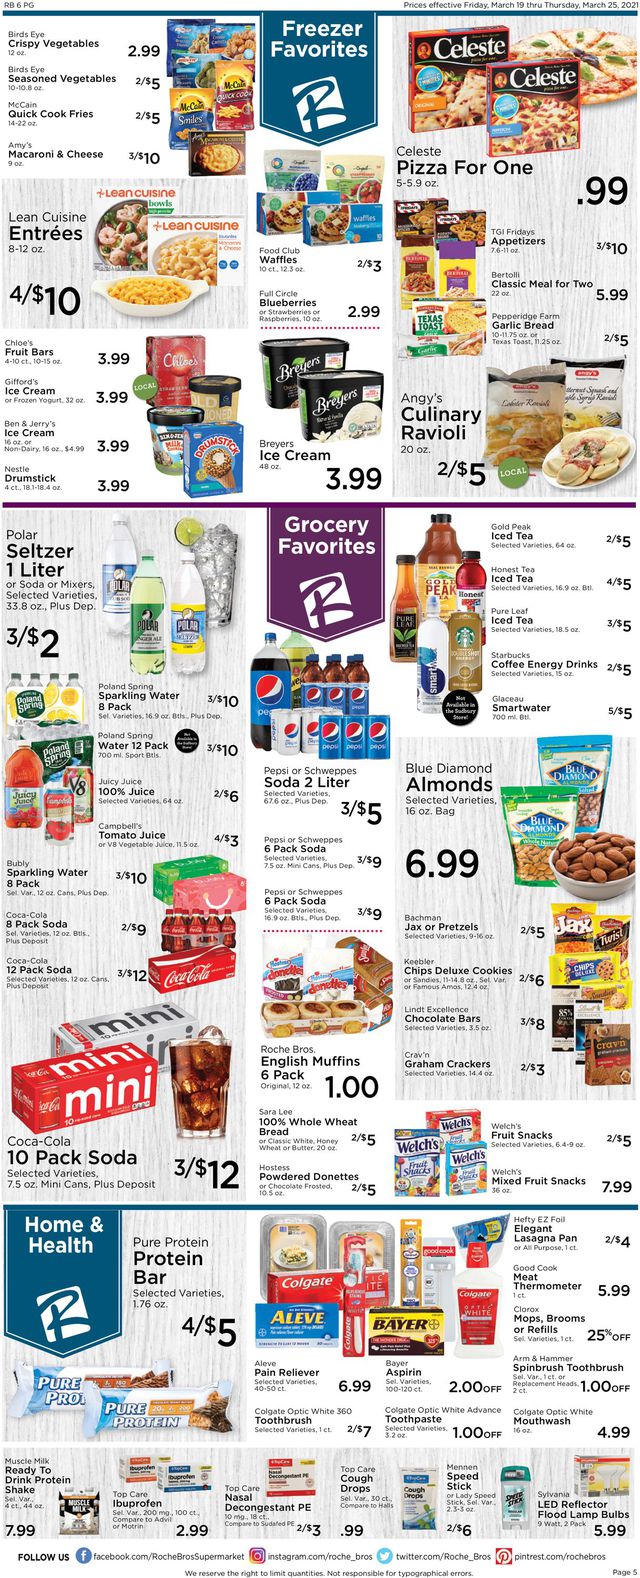 Roche Bros. Supermarkets Ad from 03/19/2021